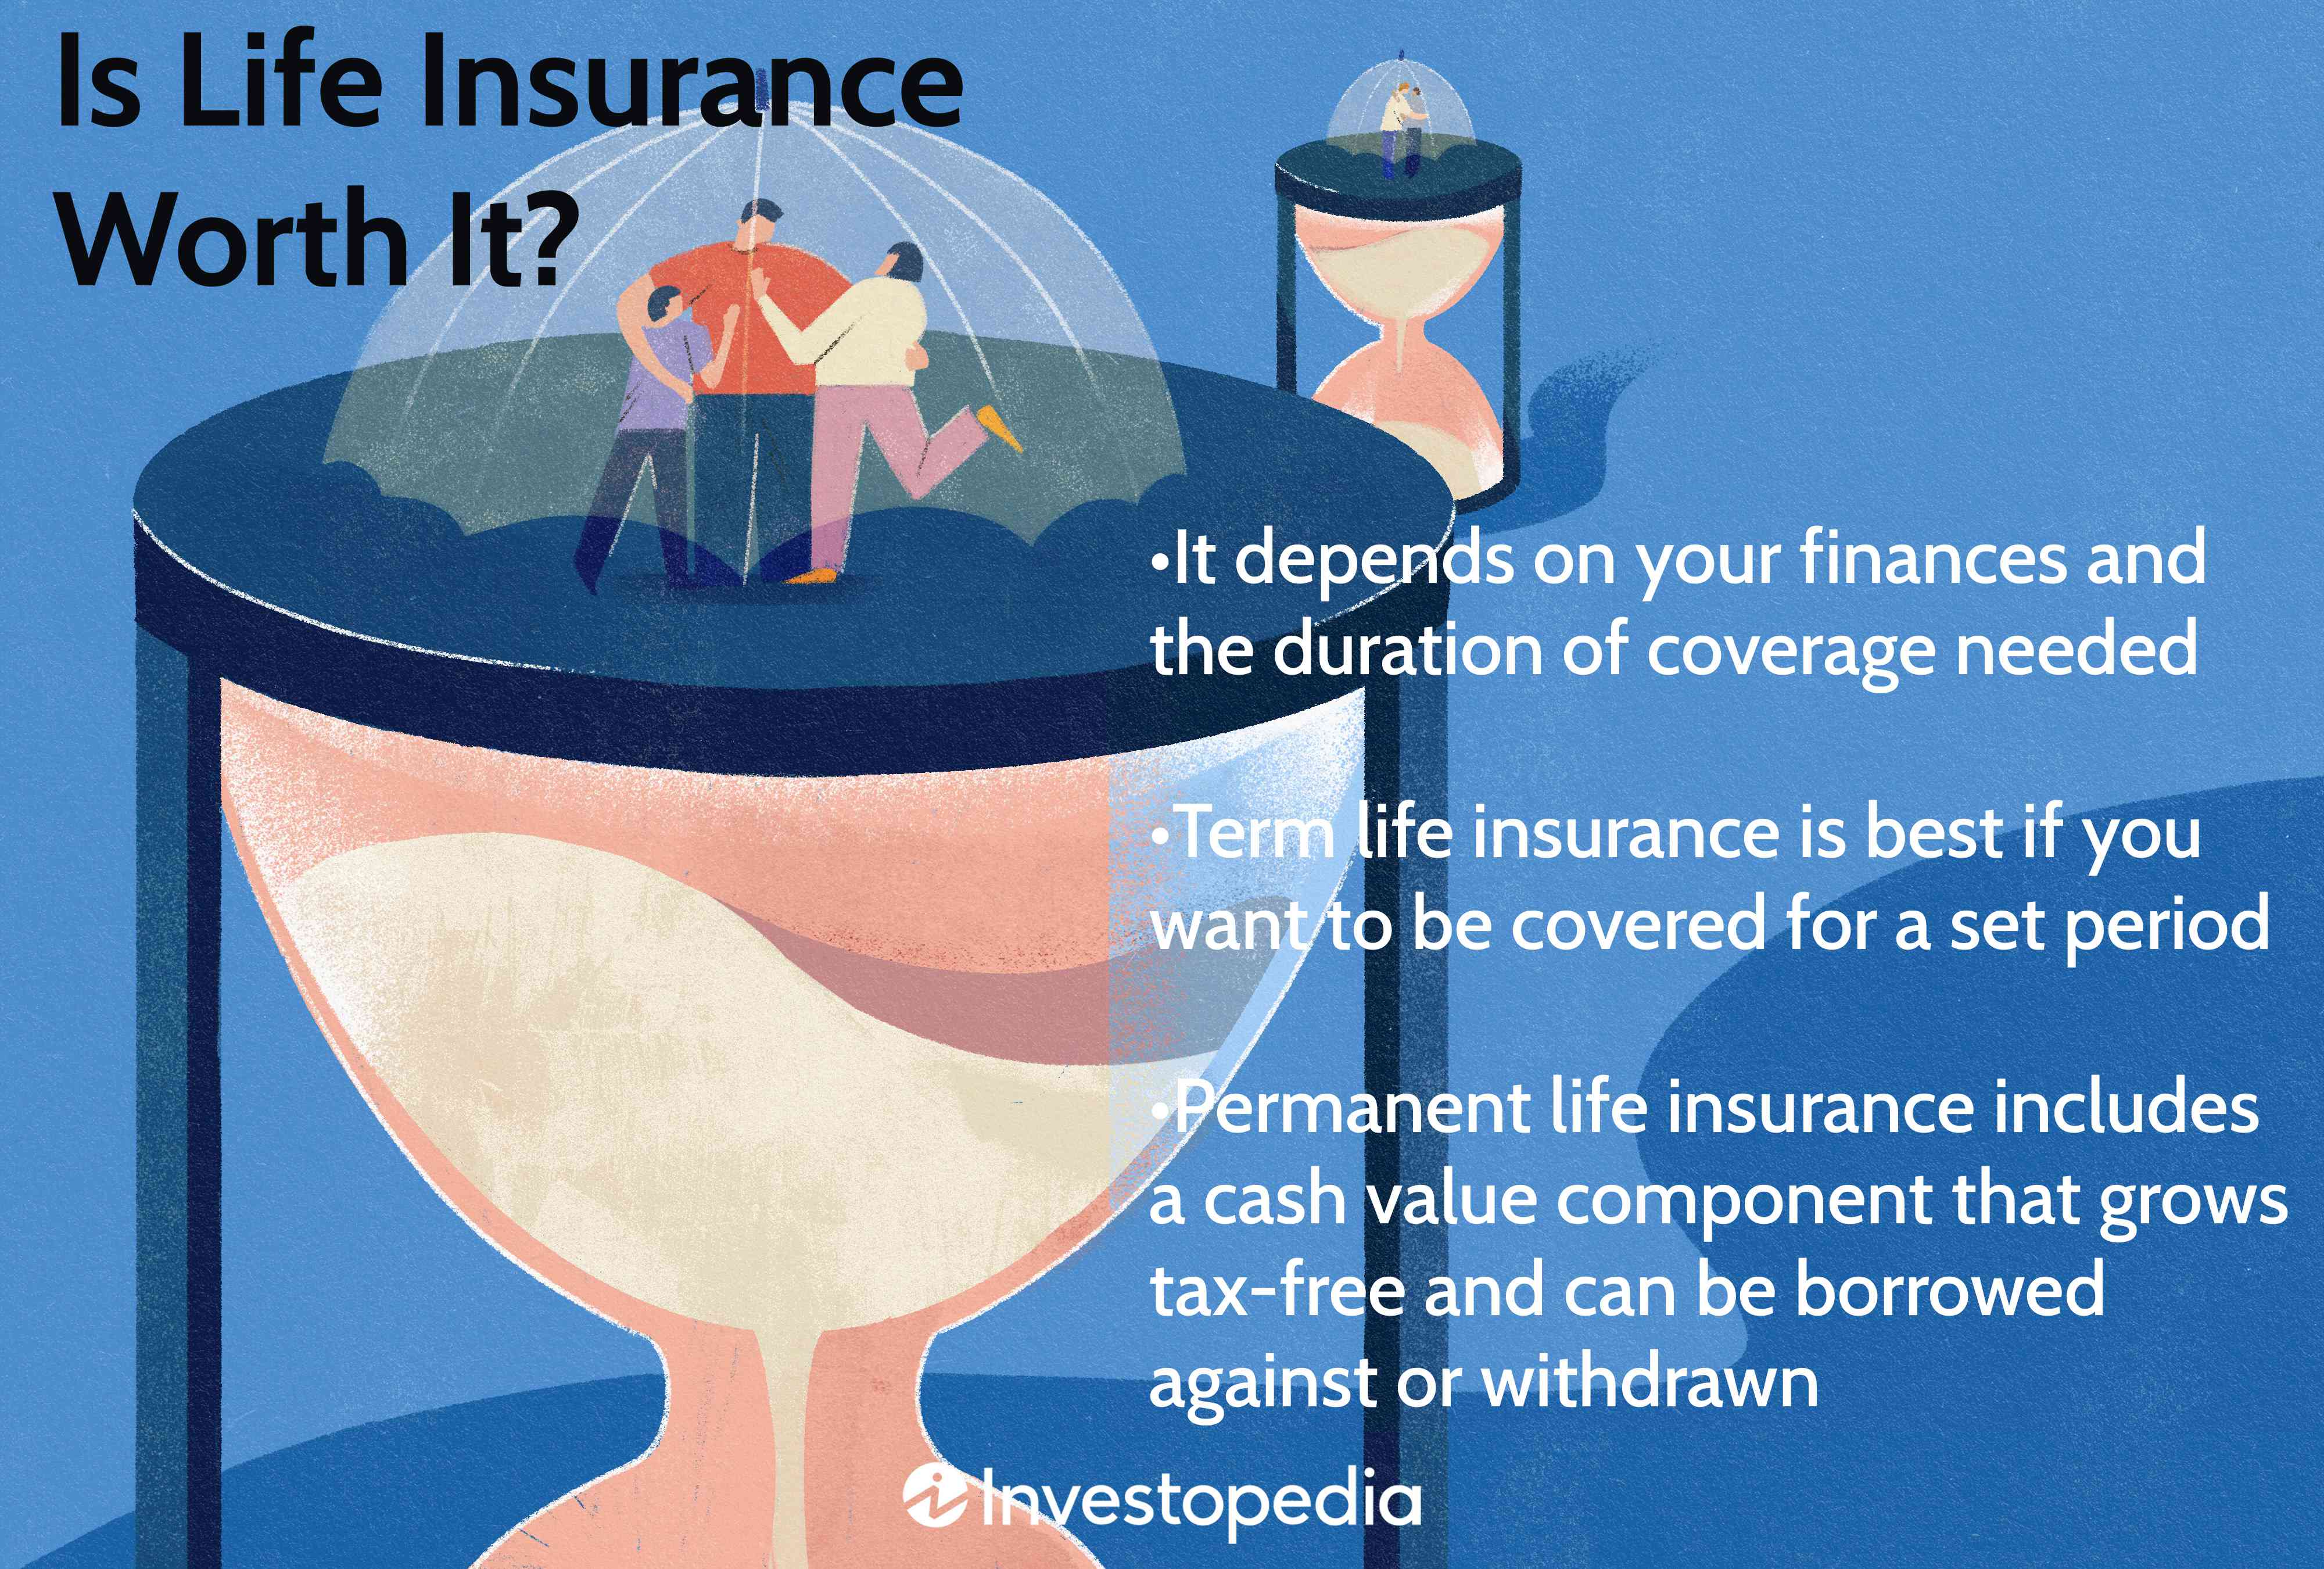 is life insurance a good investment?